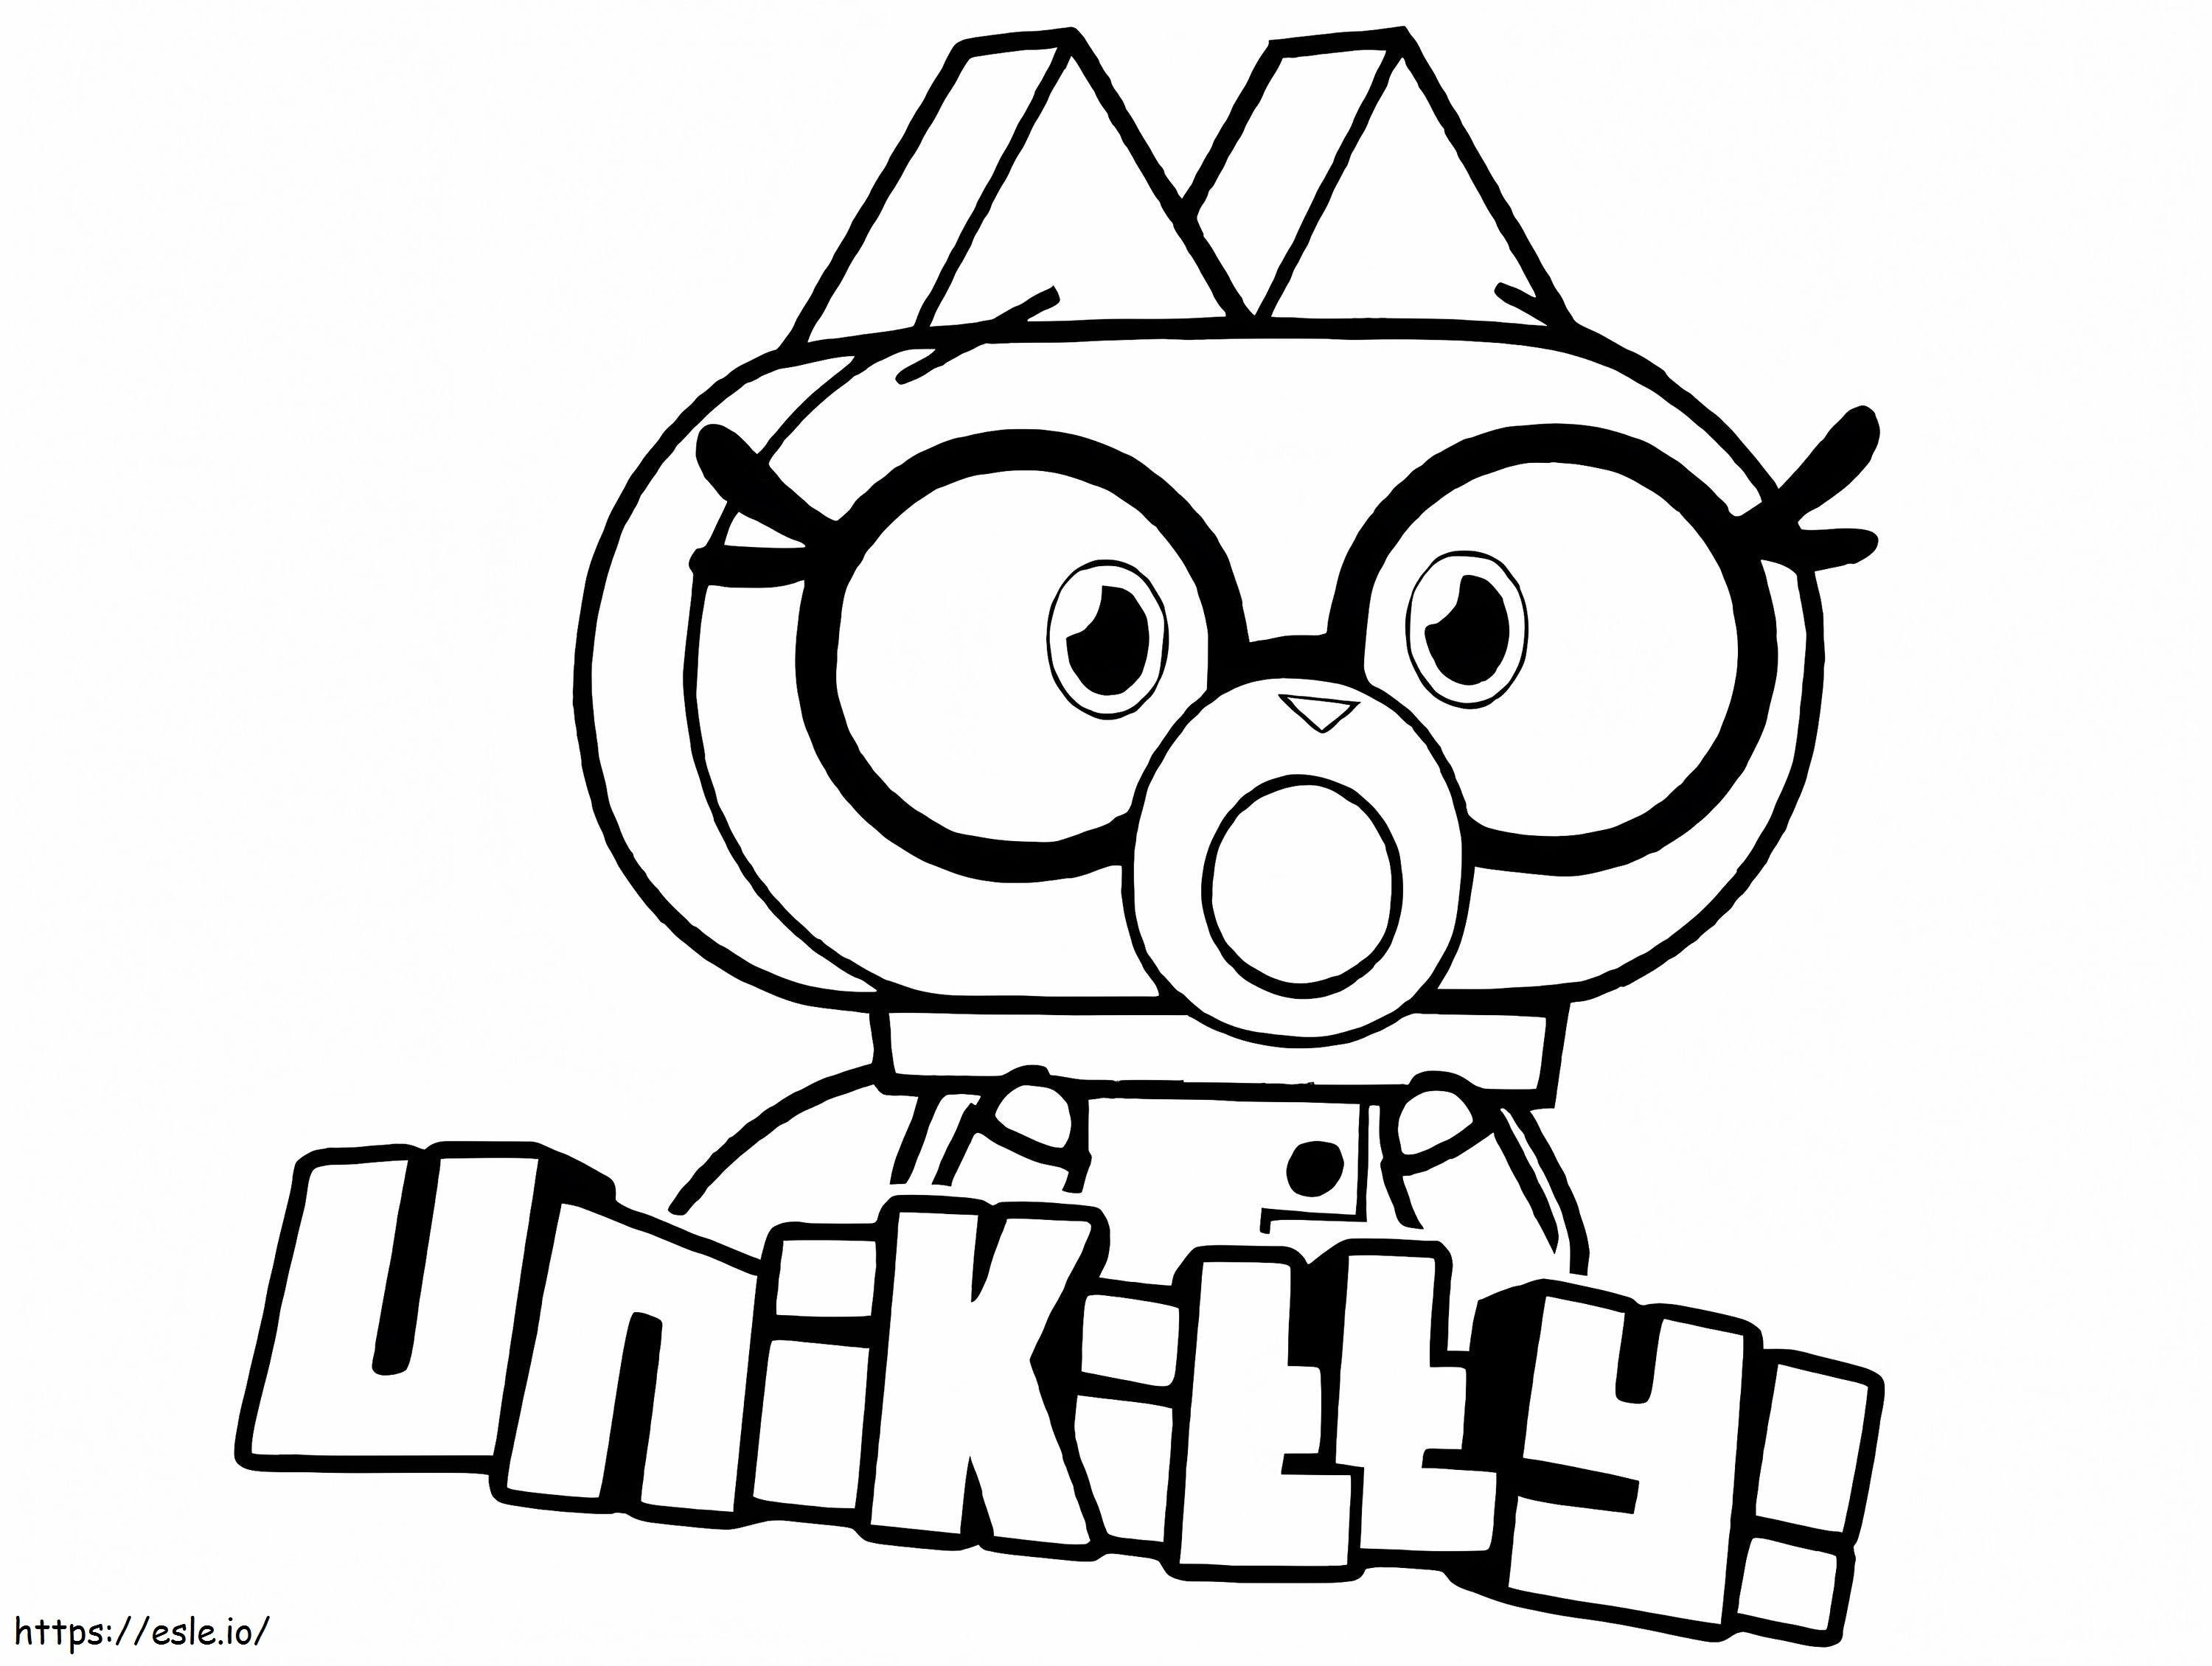 Dr. Fox From Unikitty coloring page